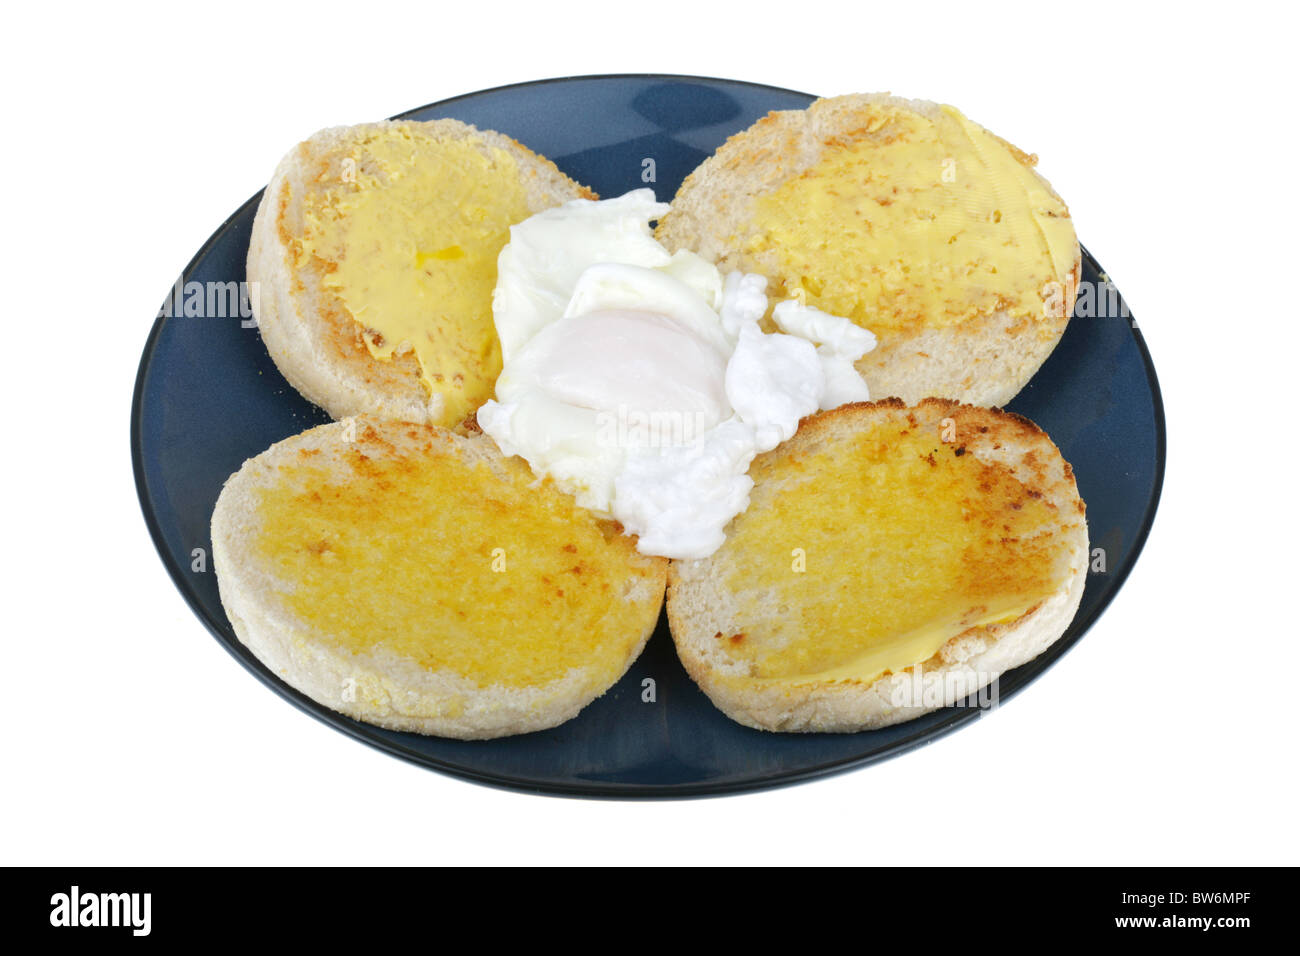 Two Muffins with Poached Egg Stock Photo